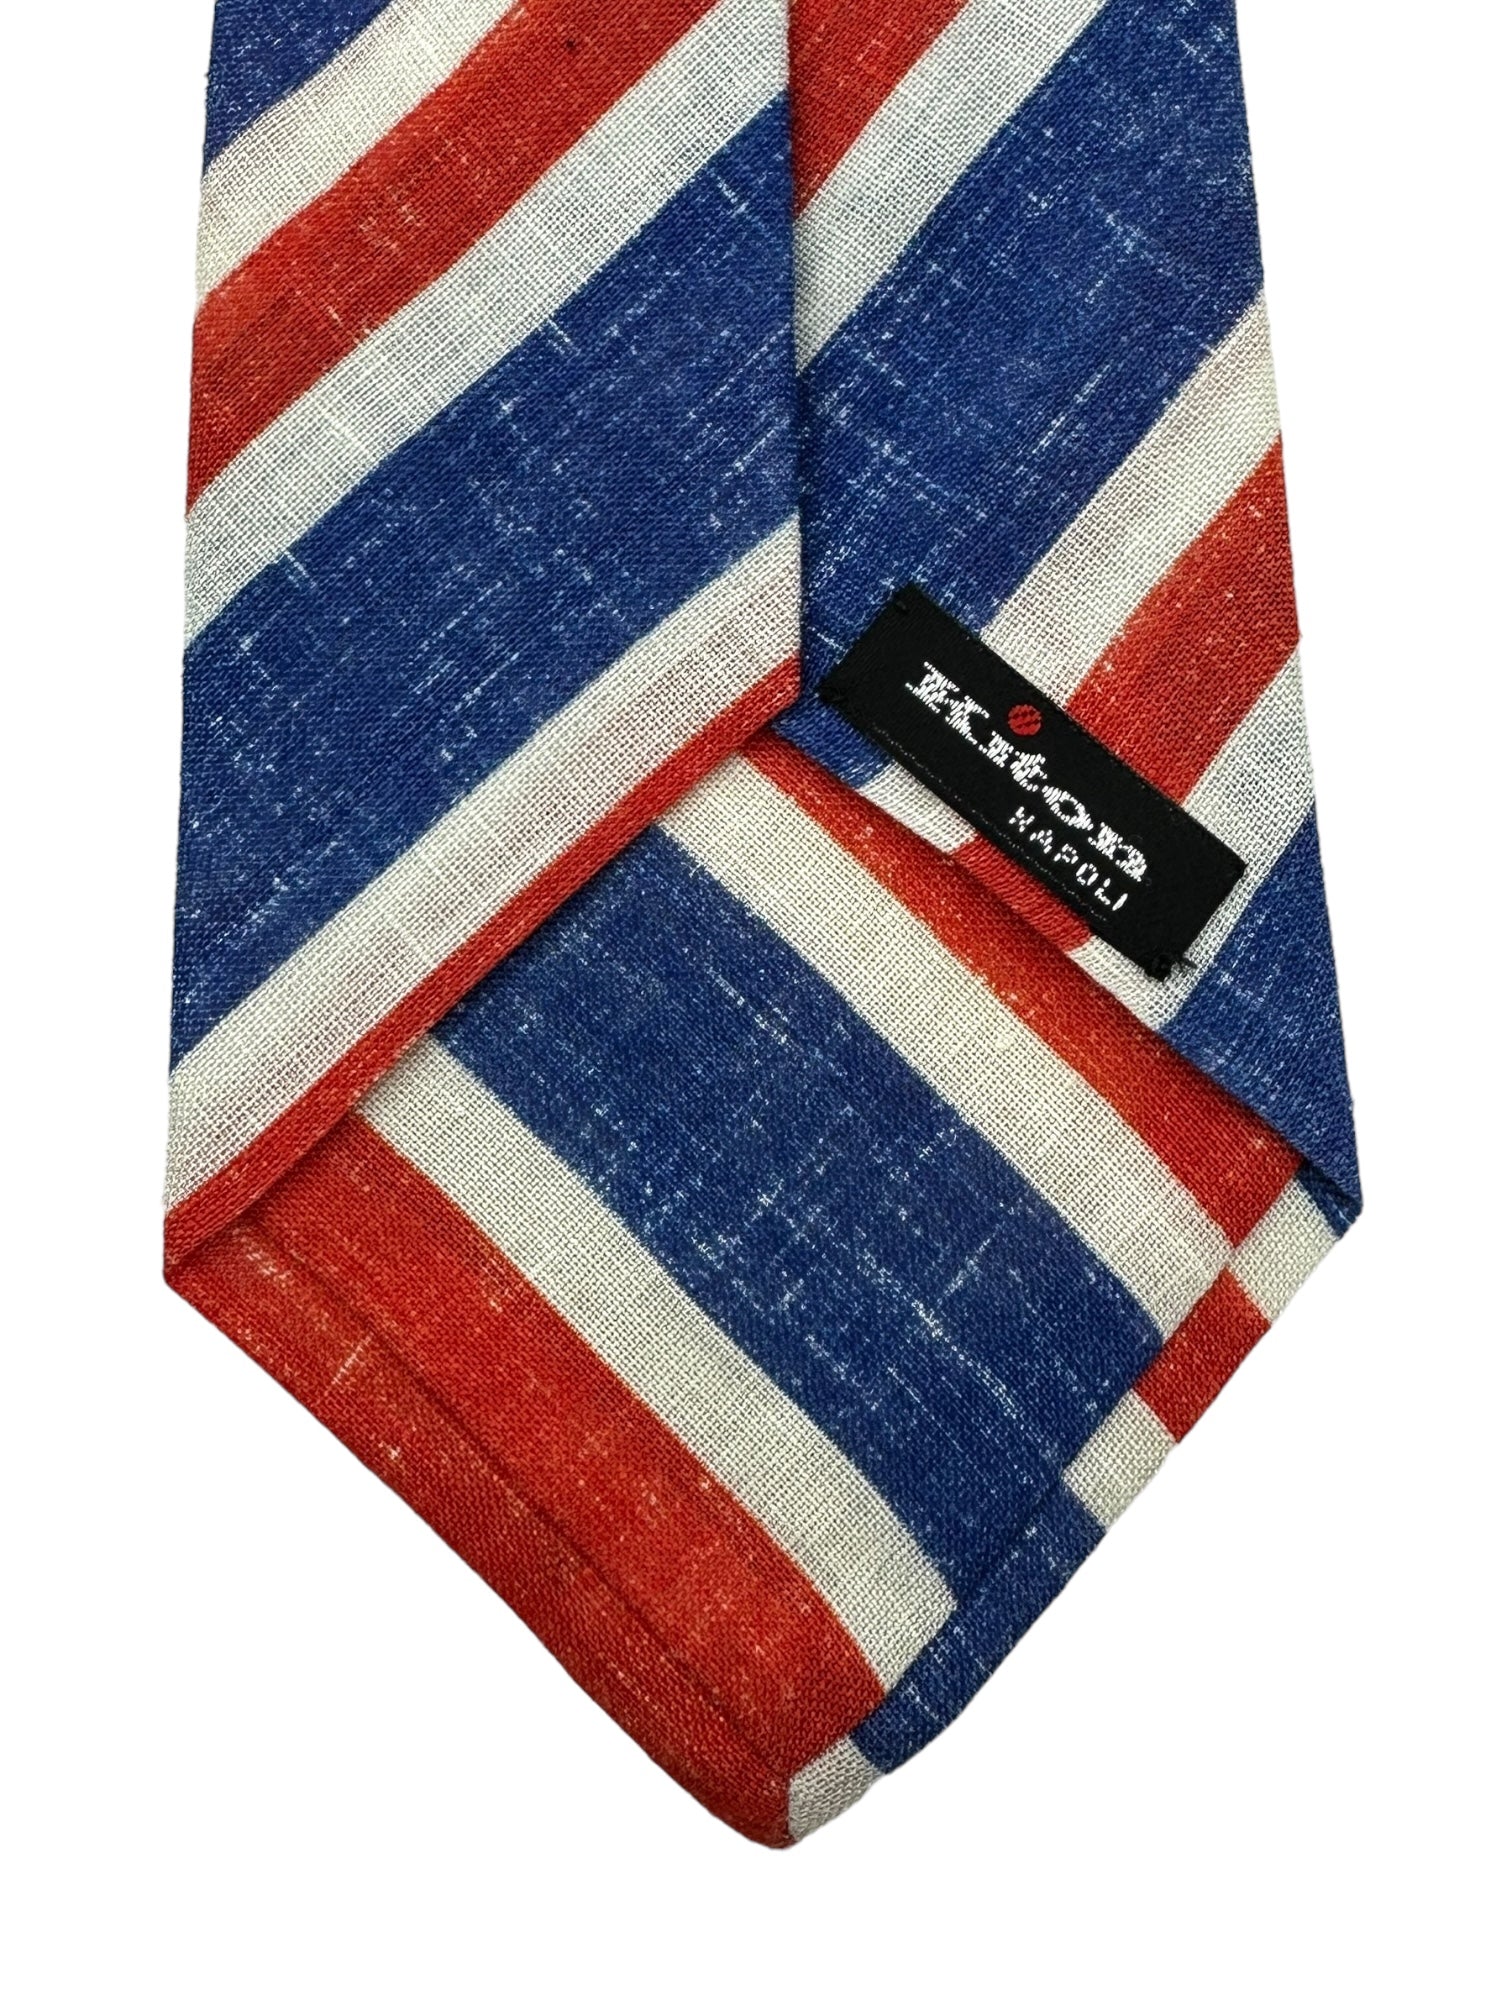 Kiton 7-Fold Blue and Red Club Stripe Linen Tie